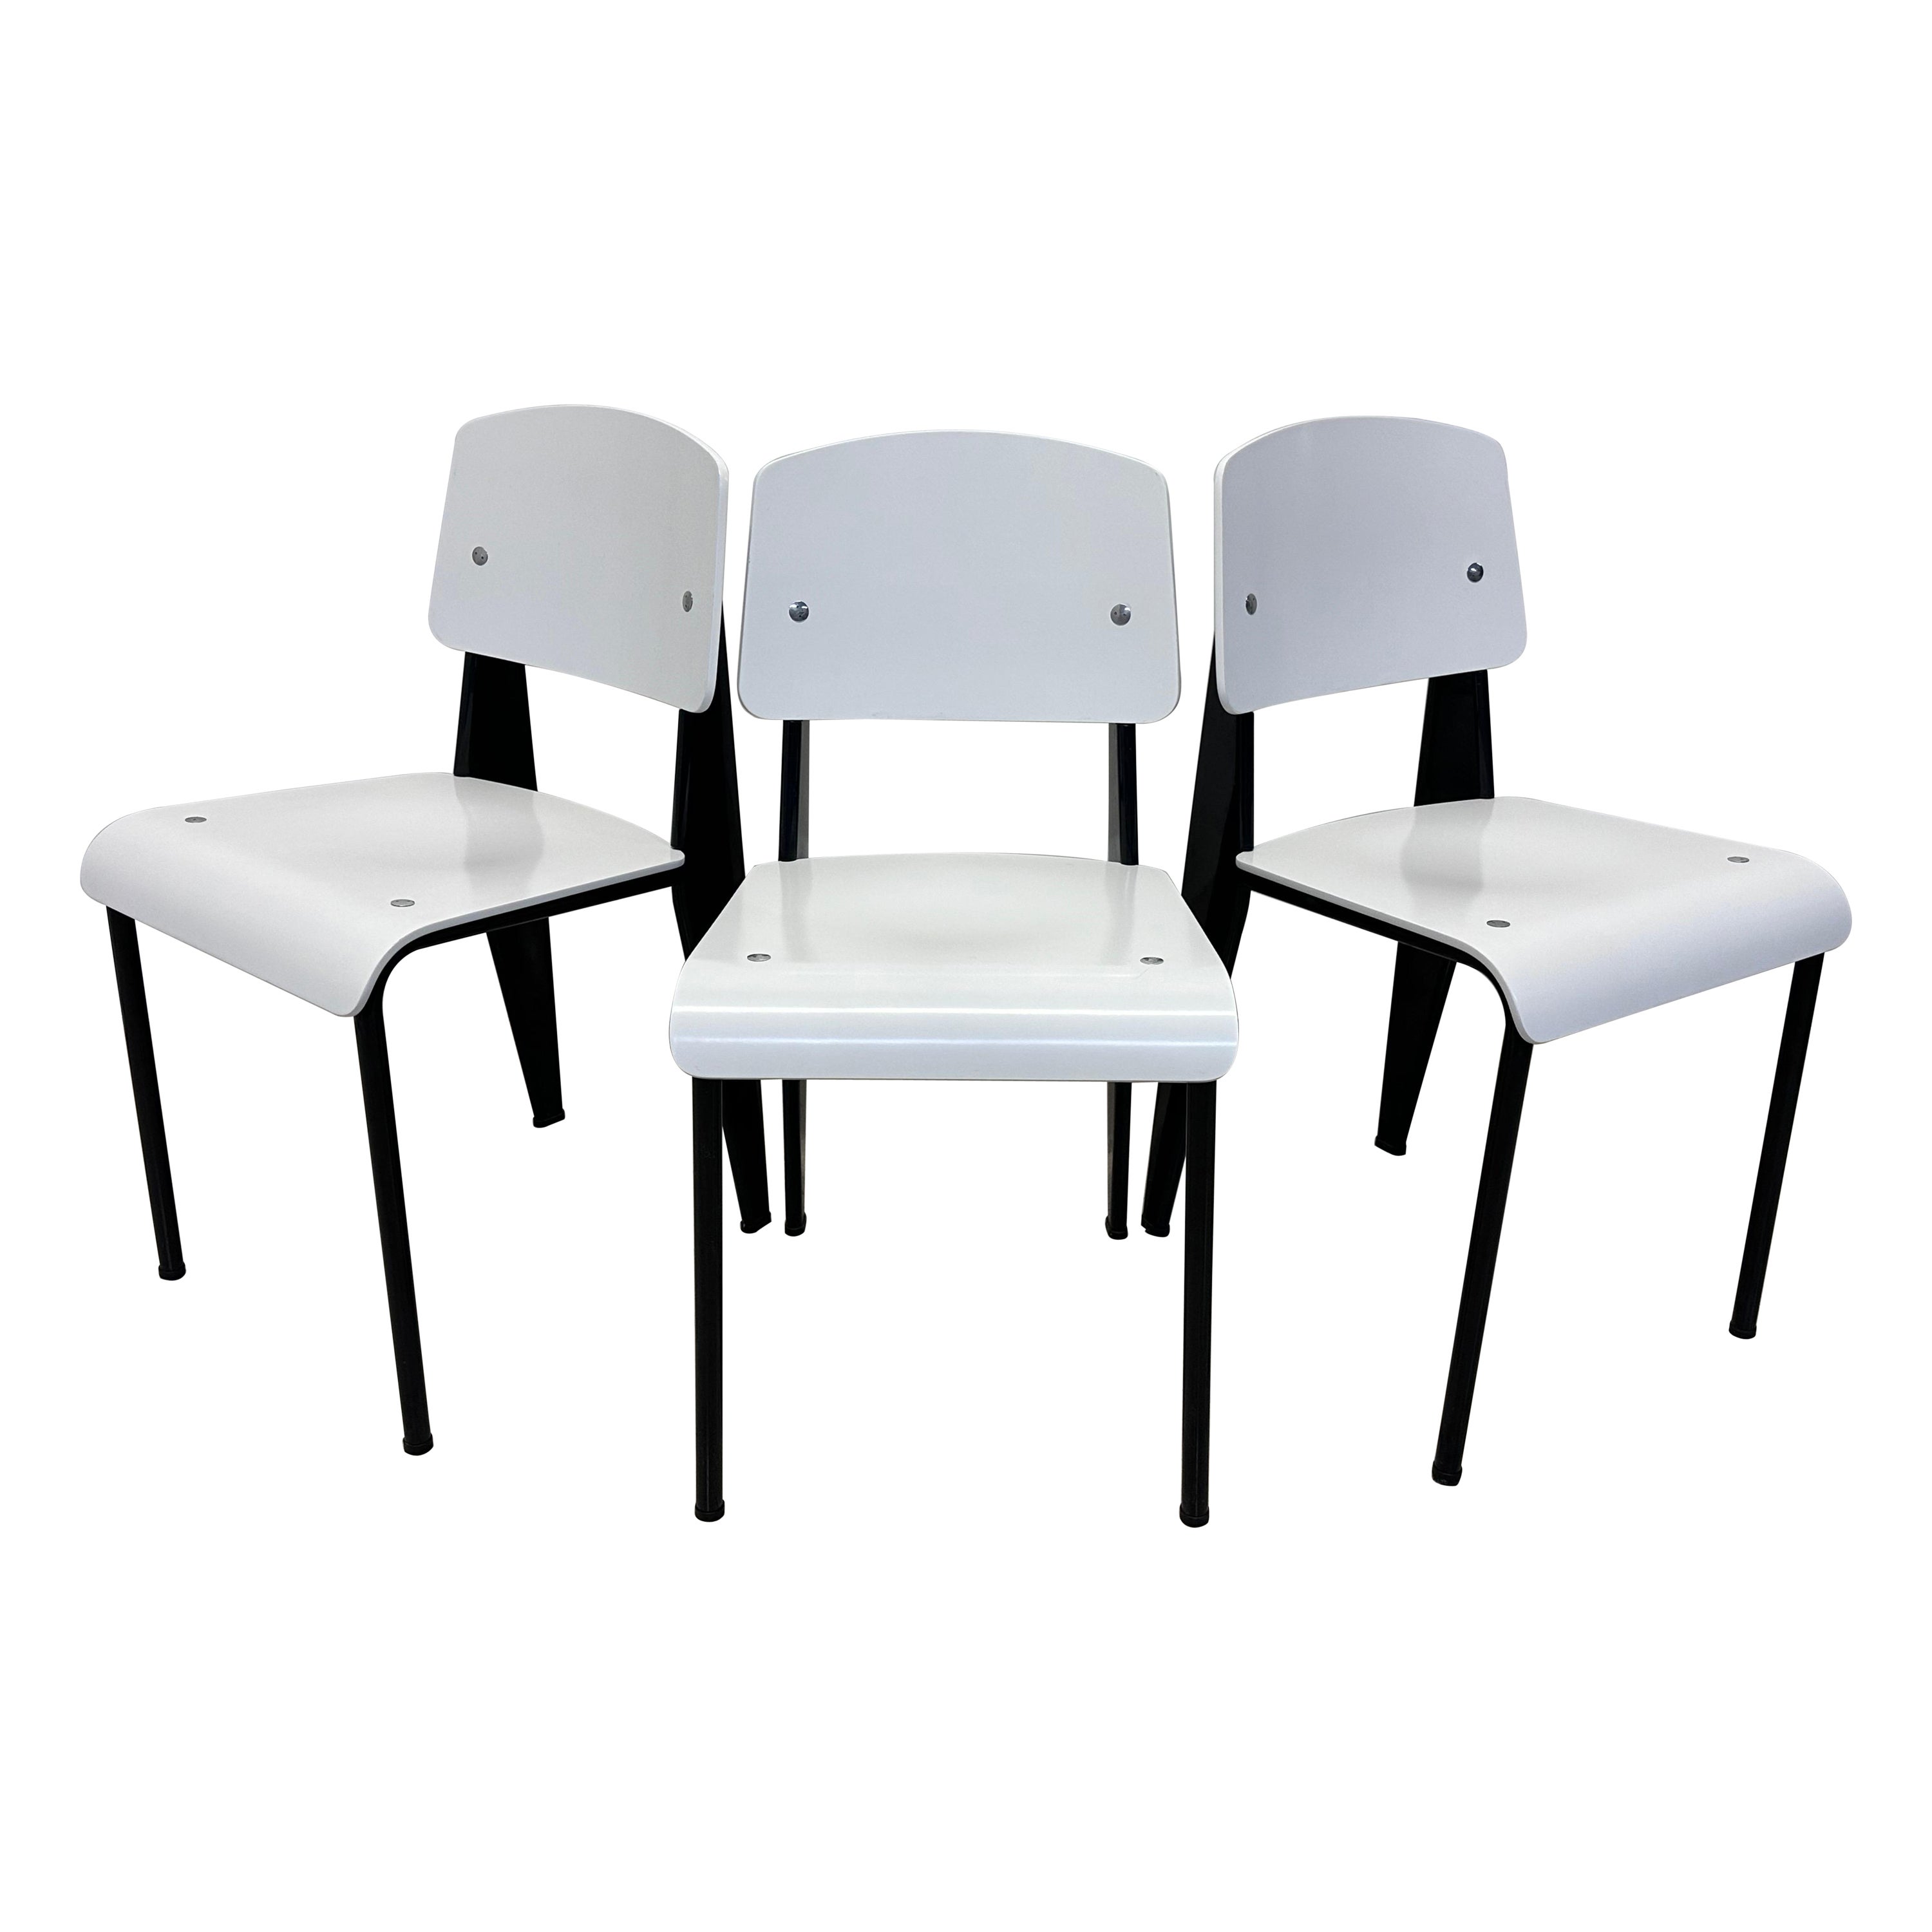 Jean Prouve Standard Chairs for Vitra - Set of Three